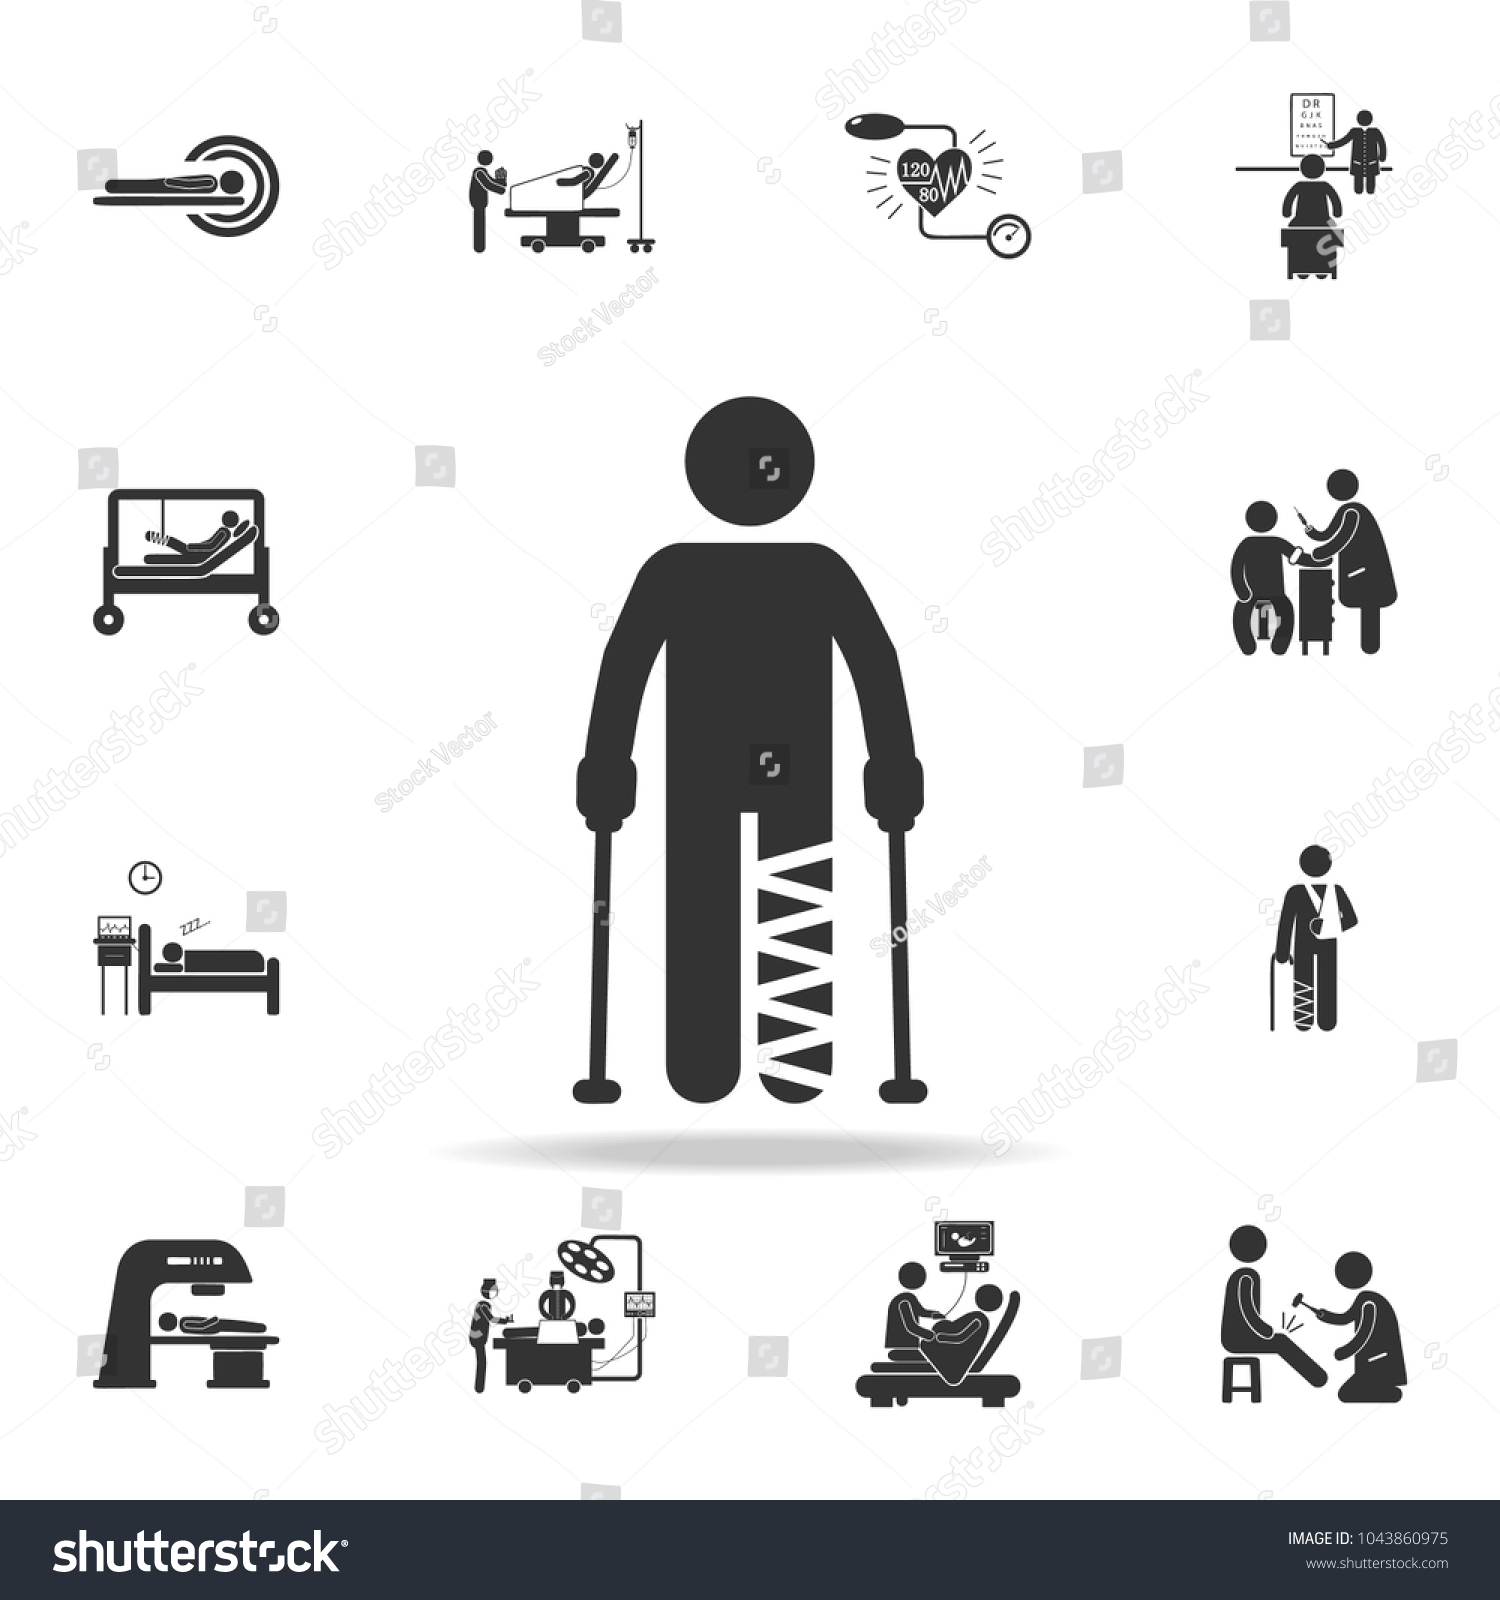 SVG of gypsum foot crutch illustration icon. Detailed set of medicine element Illustration. Premium quality graphic design. One of the collection icons for websites, web design, mobile on white background svg